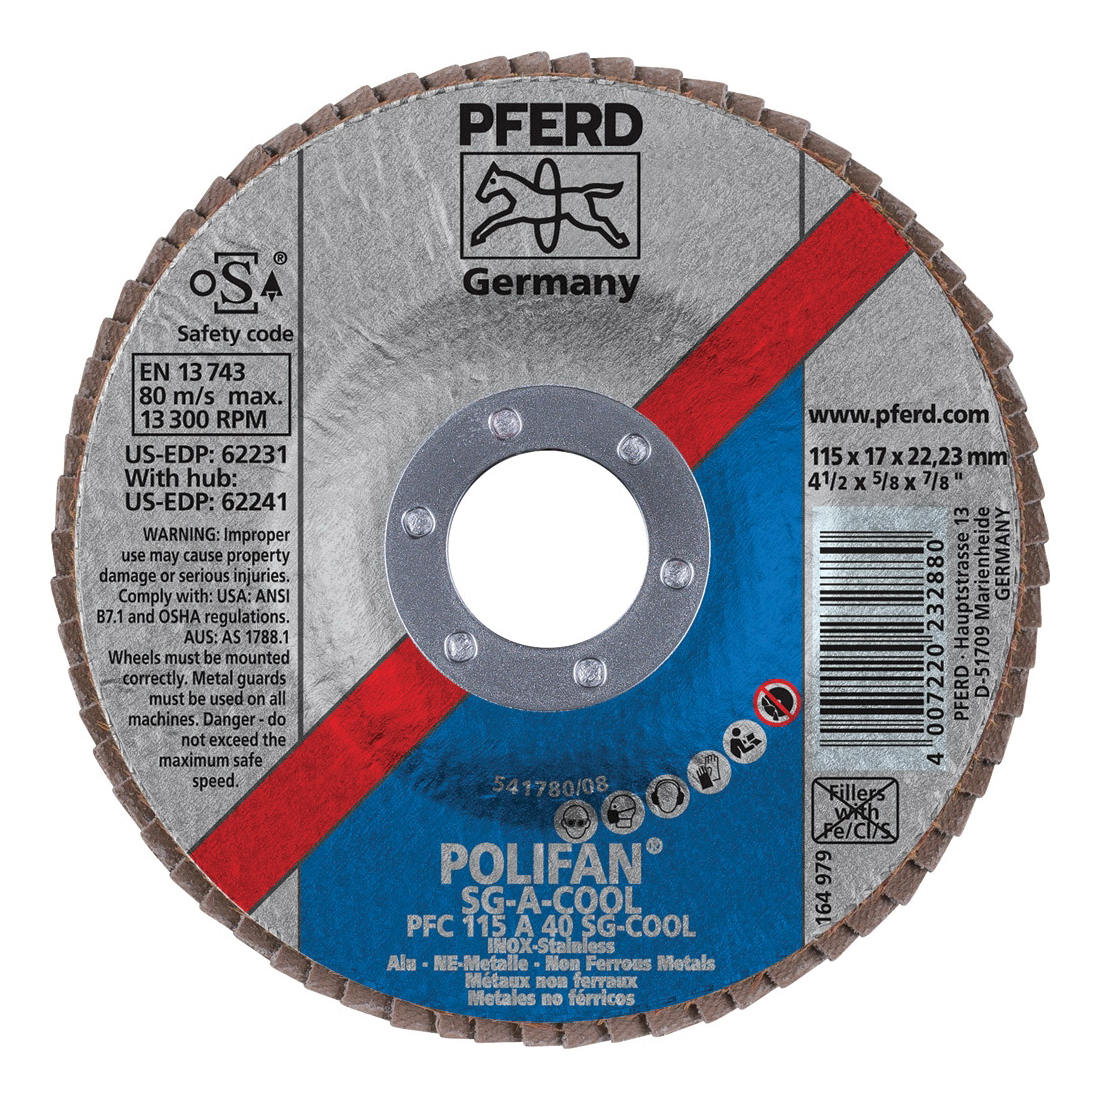 PFERD Polifan® 62231 Performance Line SG A-COOL Unthreaded Coated Abrasive Flap Disc, 4-1/2 in Dia, 7/8 in Center Hole, 40 Grit, Aluminum Oxide Abrasive, Type 29 Conical Disc